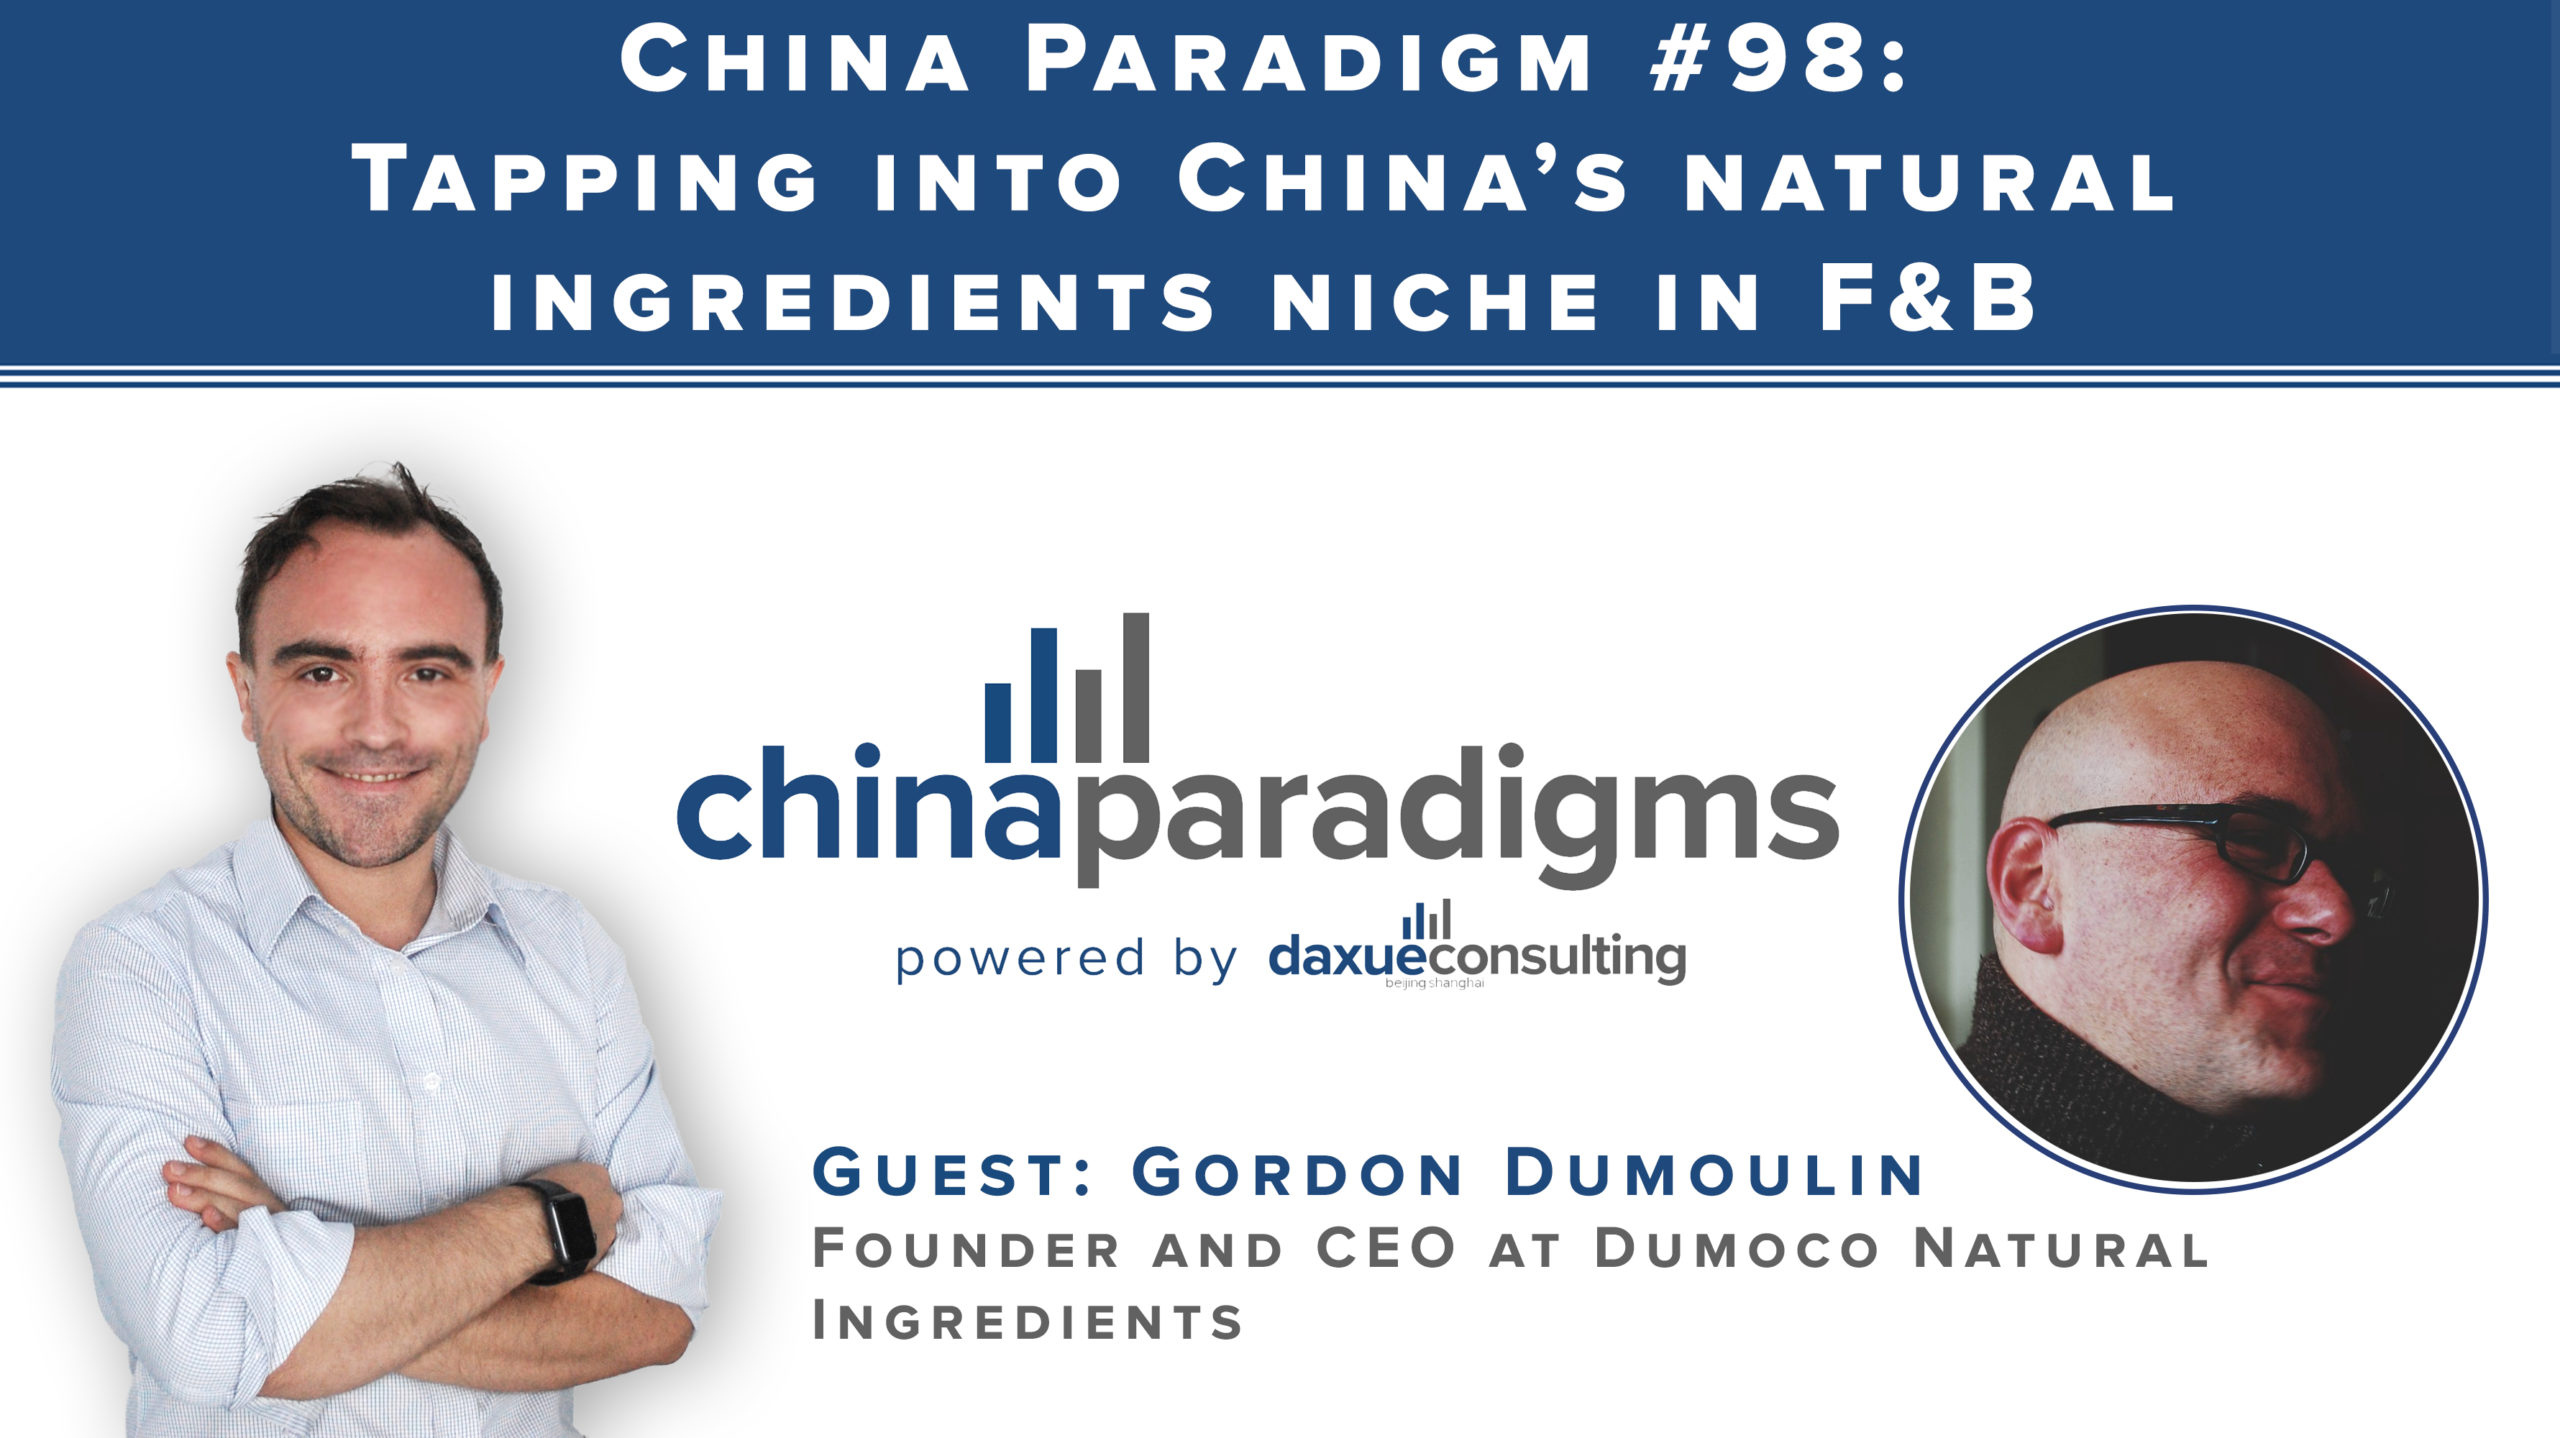 China Paradigm 98: Tapping into China’s natural ingredients niche in F&B